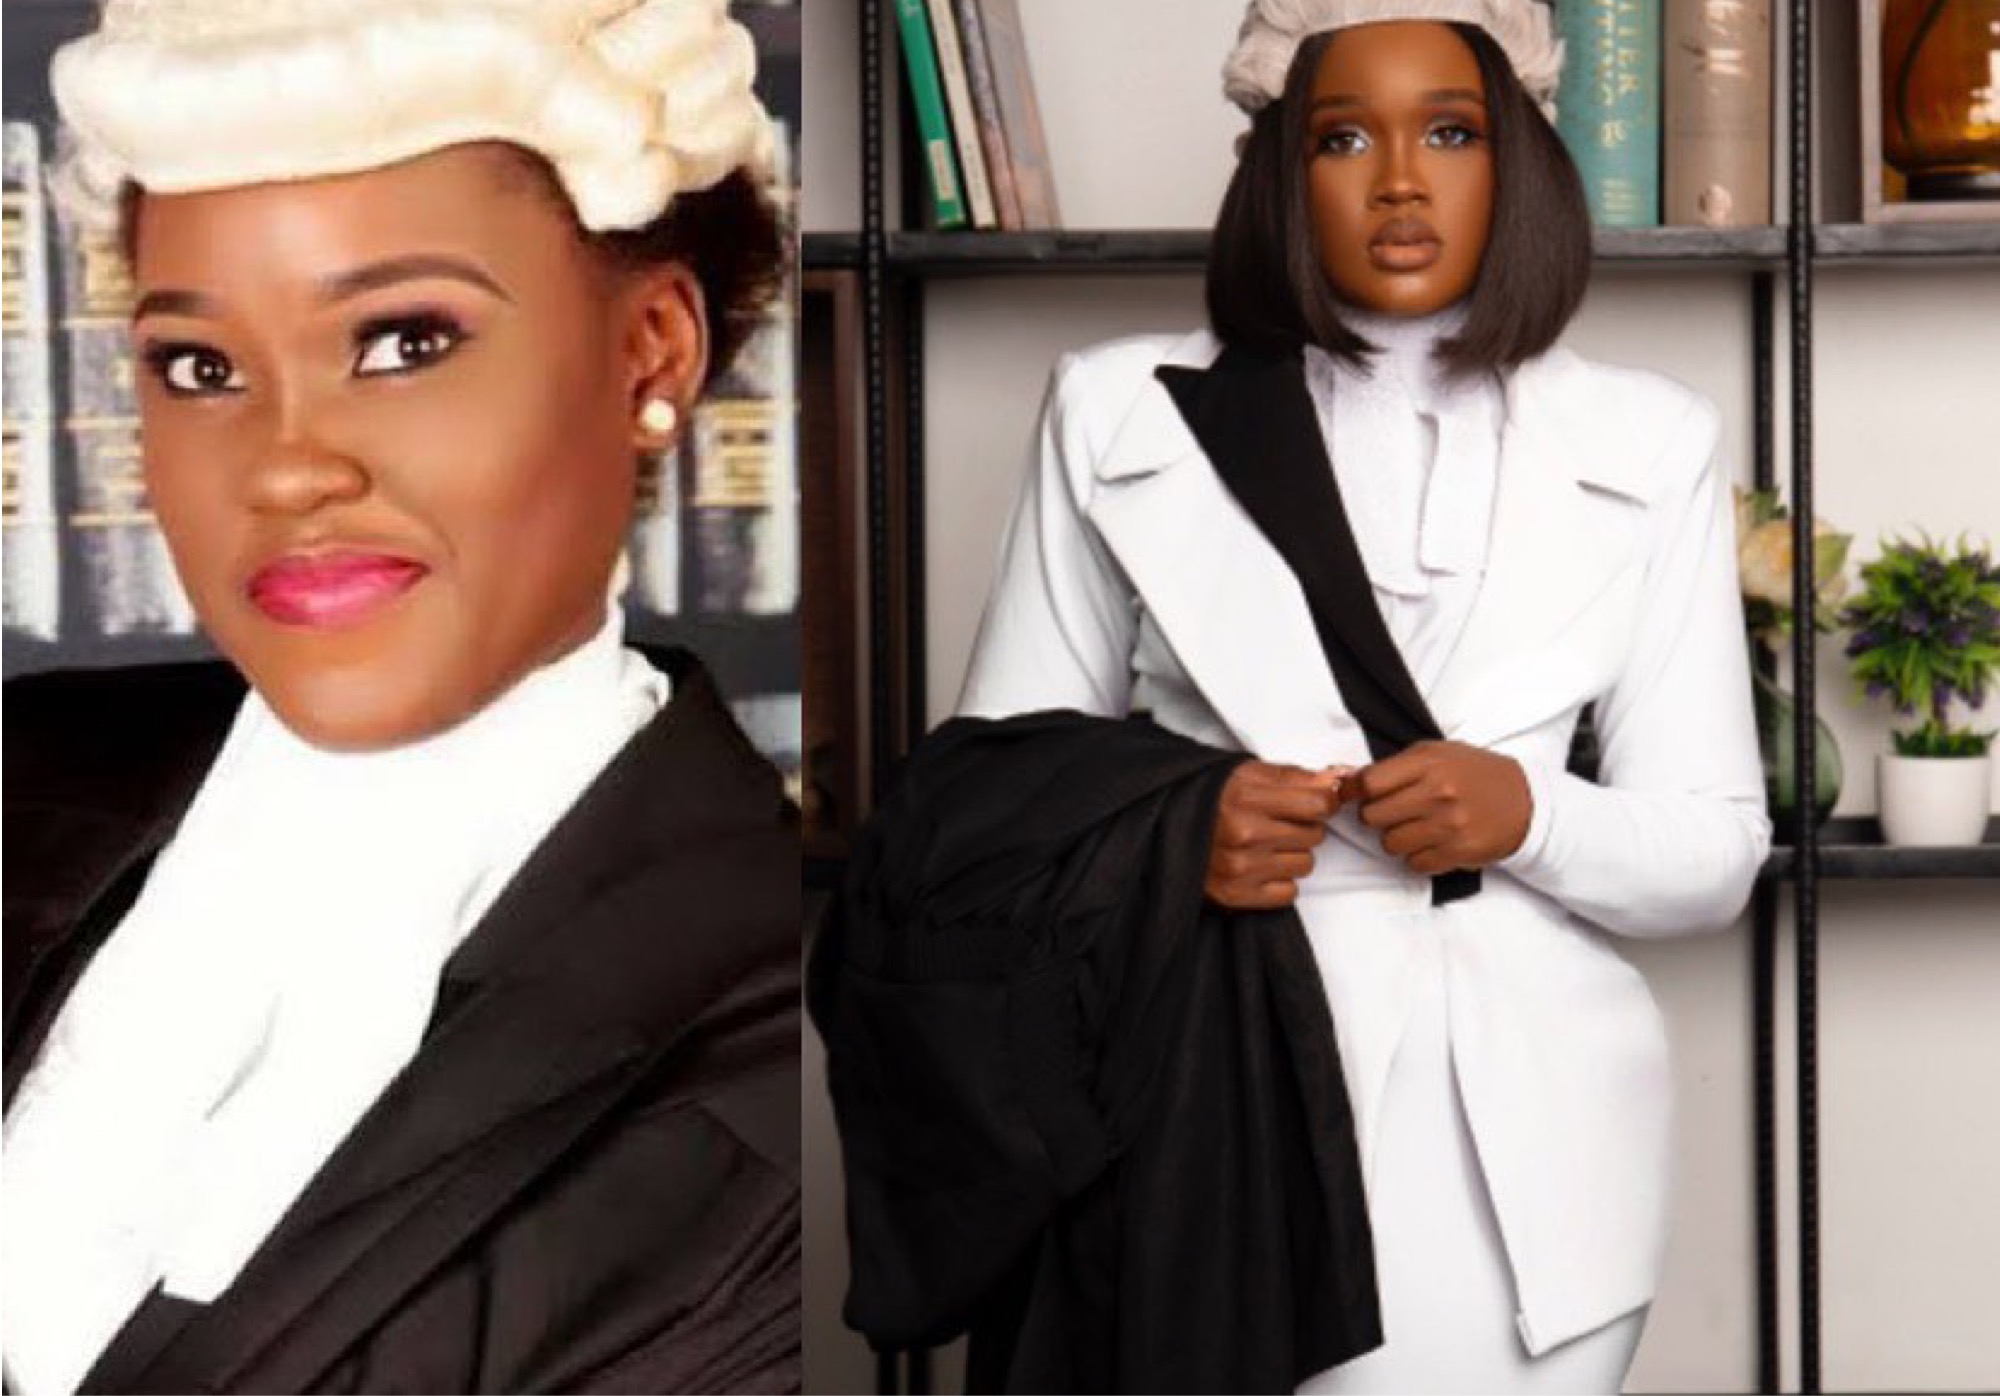 "Know Who You’re Coming For" - BBNaija's Cee-C Debunks Rumor That She Didn’t Pass Her Bar Exams